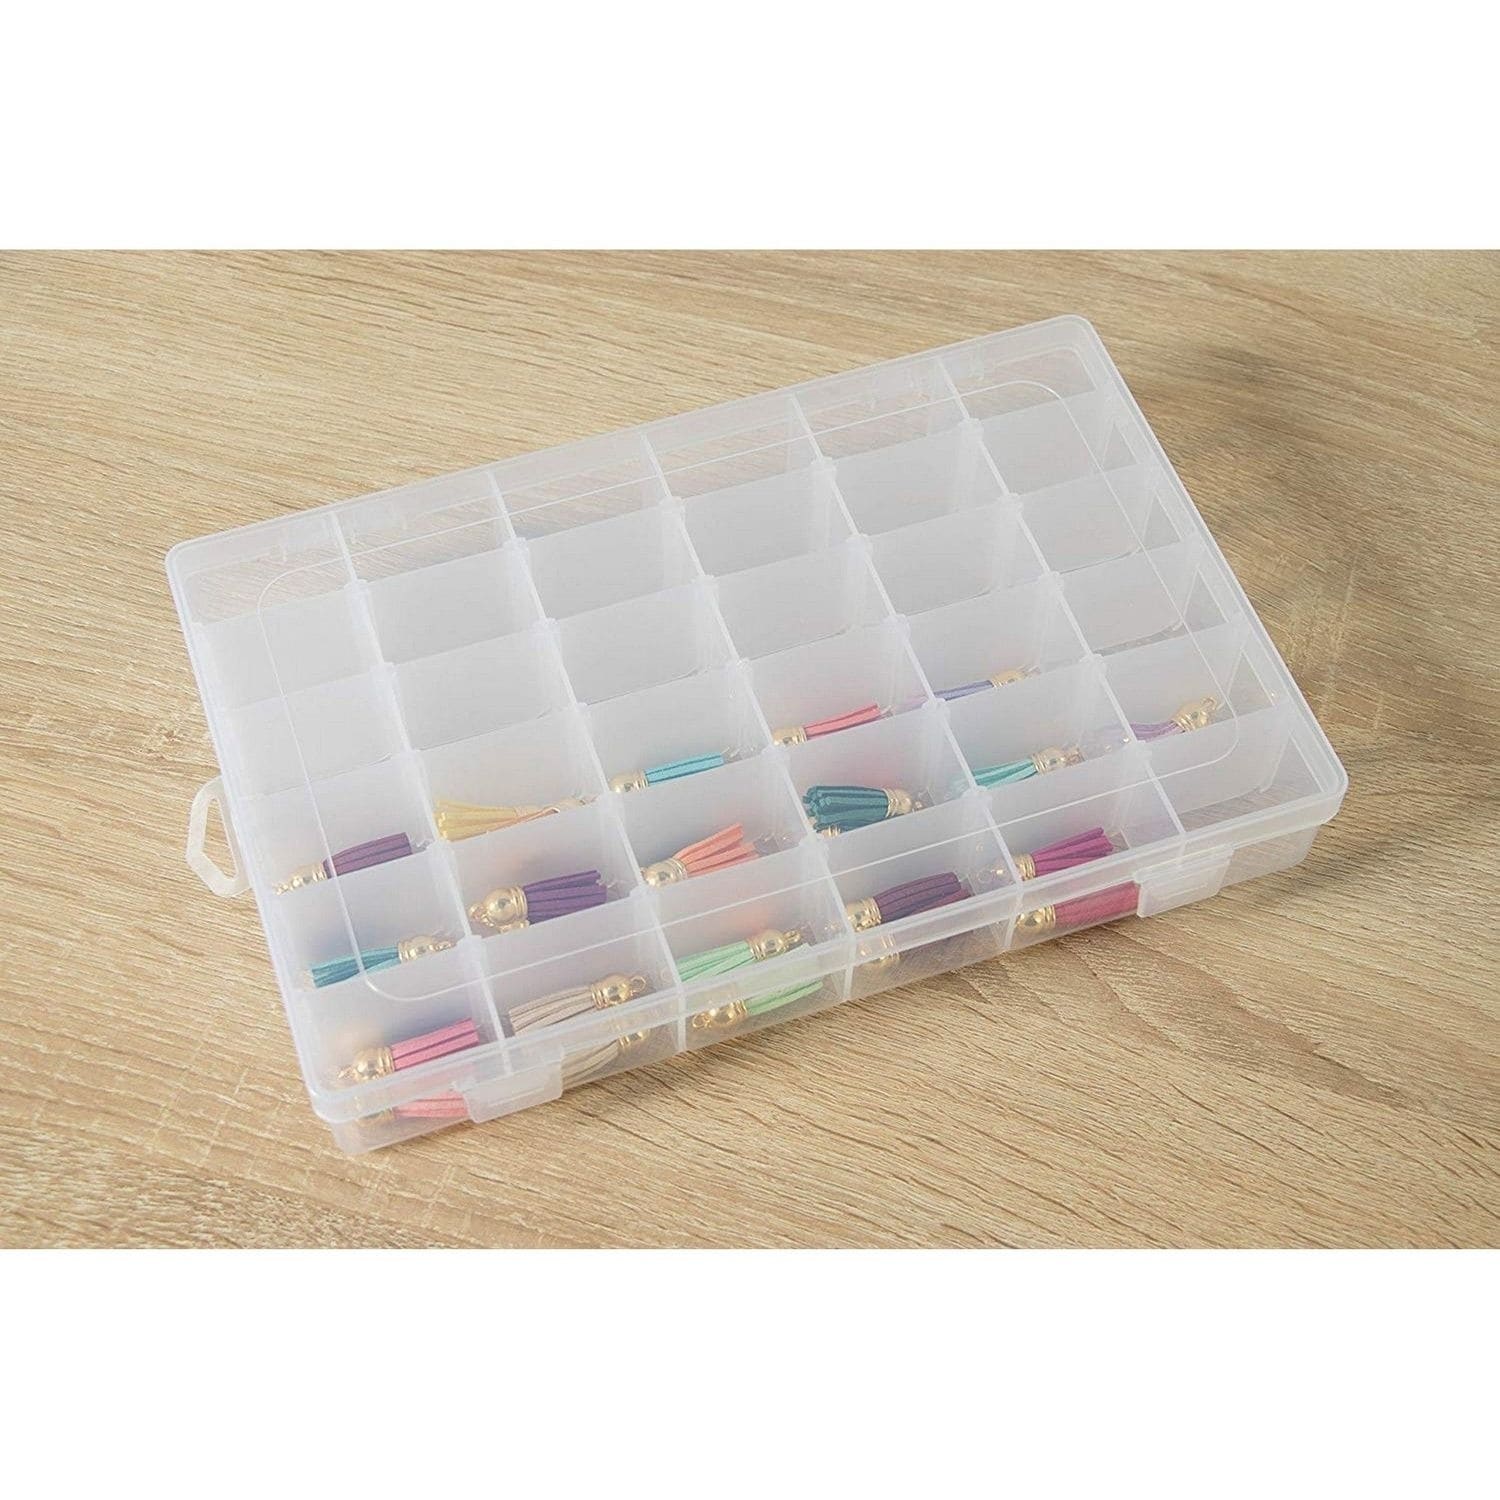 Plastic 24 Compartments Jewelry Earring Bead Container Storage Case - Clear  - Bed Bath & Beyond - 33902751